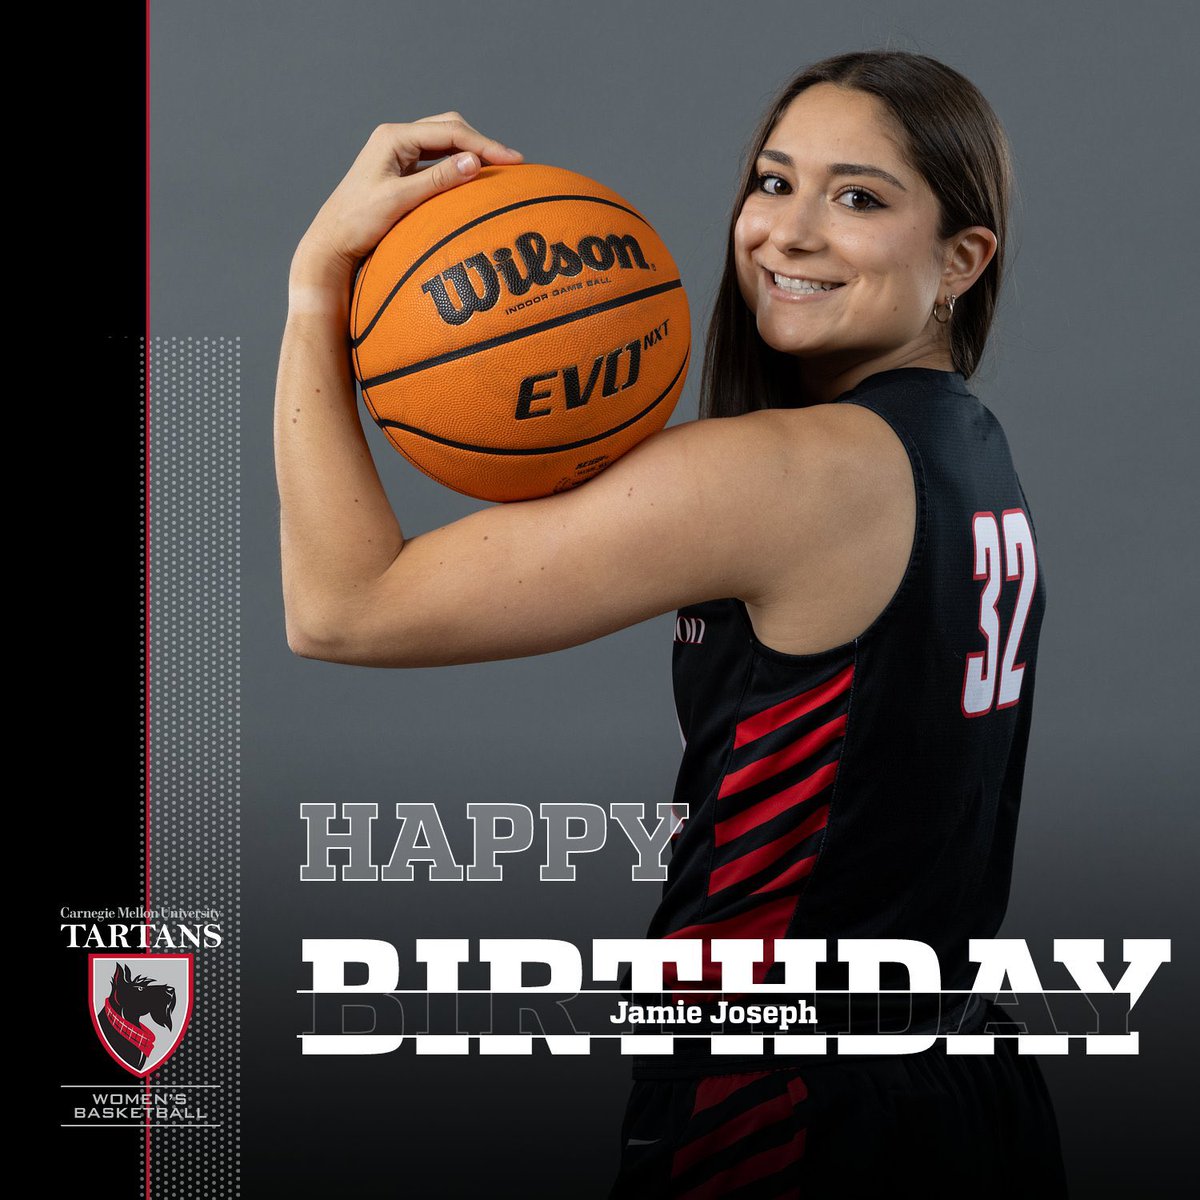 Happy Birthday to one of our (soon to be graduating) seniors, Jamie Joseph. We hope you have an amazing day 🥳🥳 #TartanProud